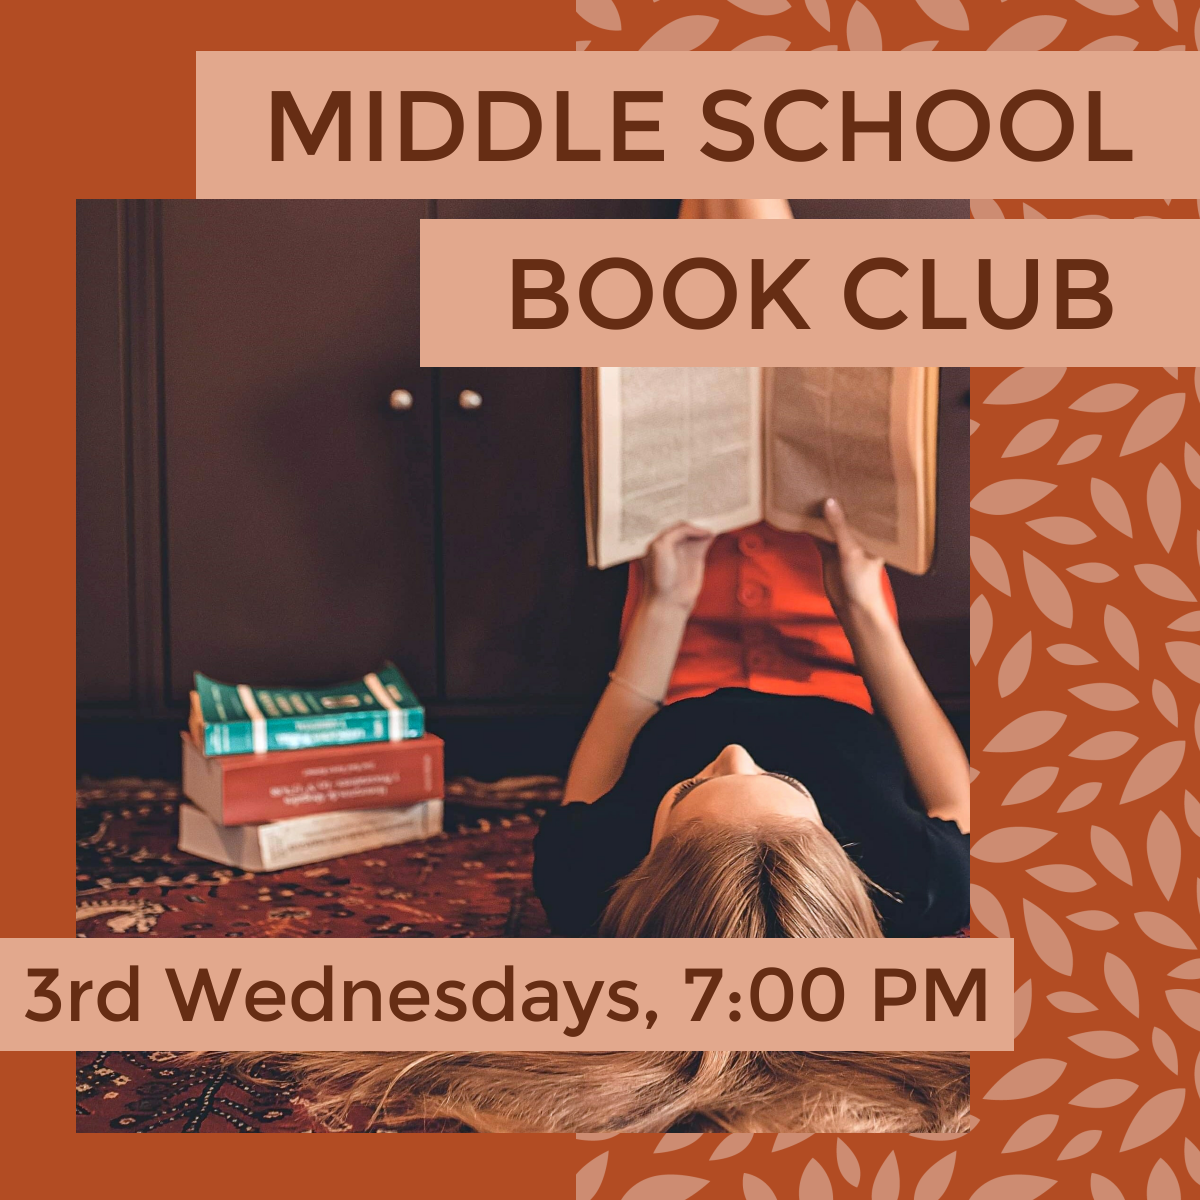 Middle School Book Club 3rd Wednesdays, 7 pm